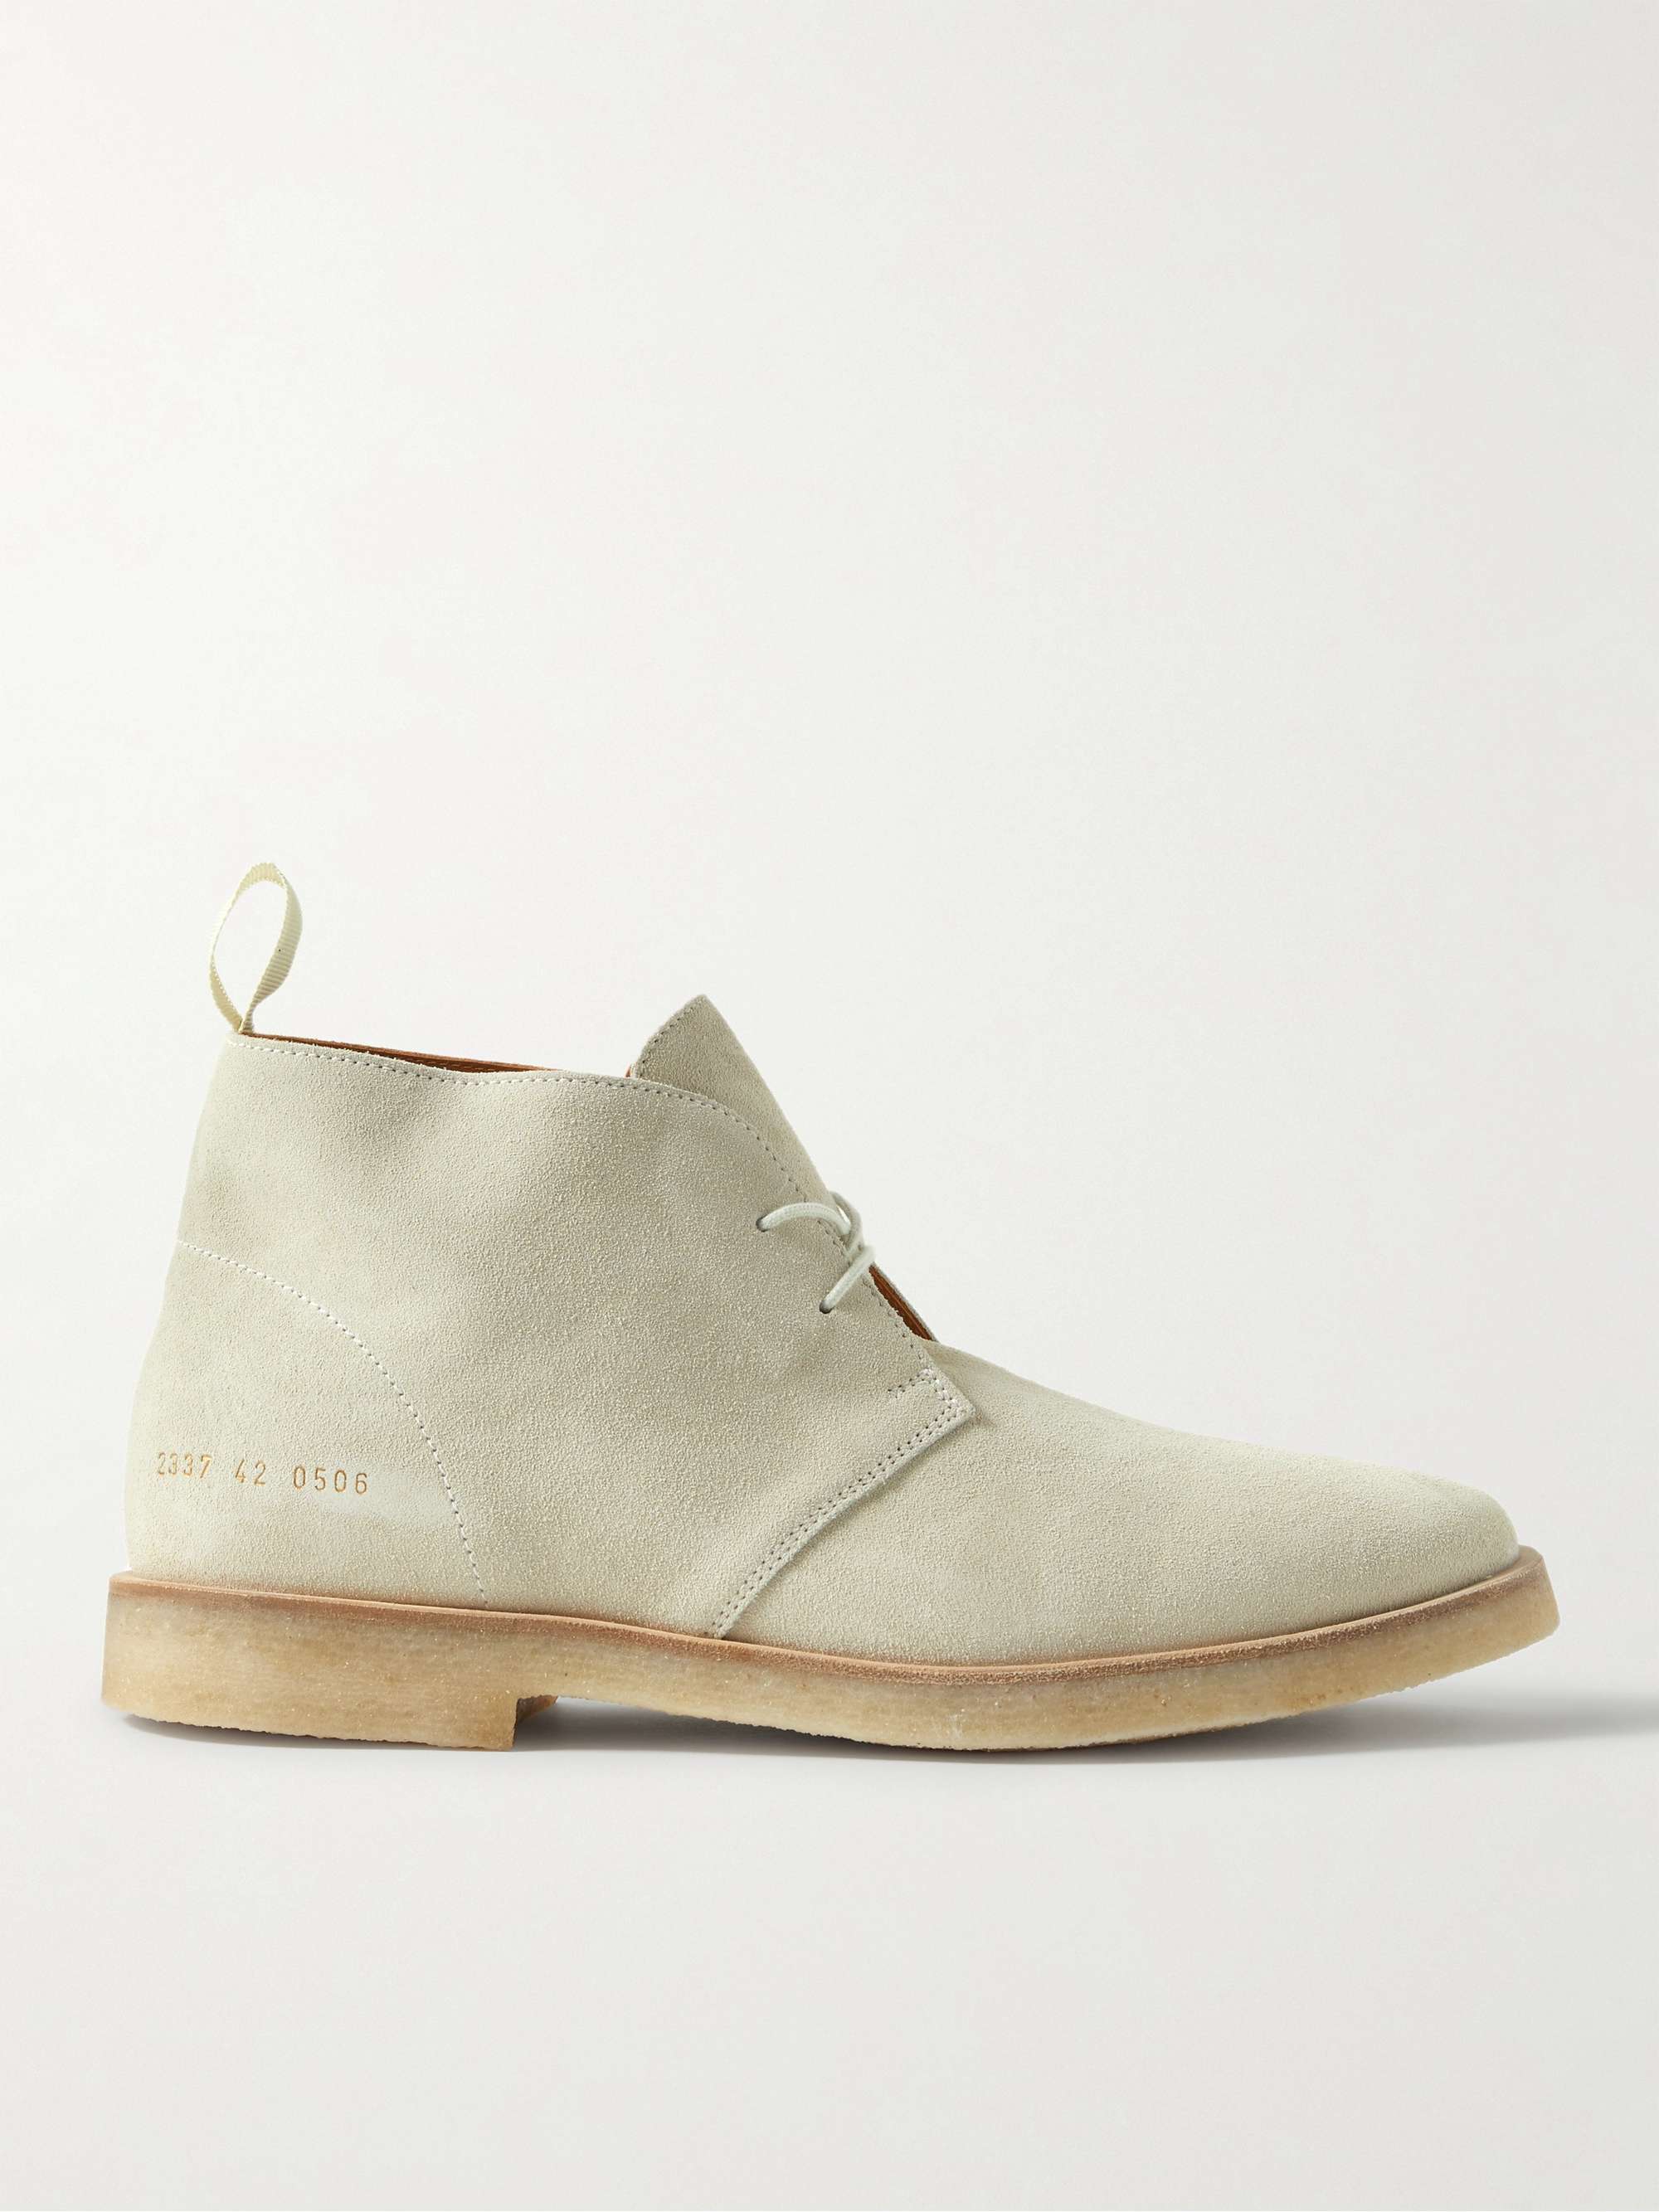 COMMON PROJECTS Suede Desert Boots